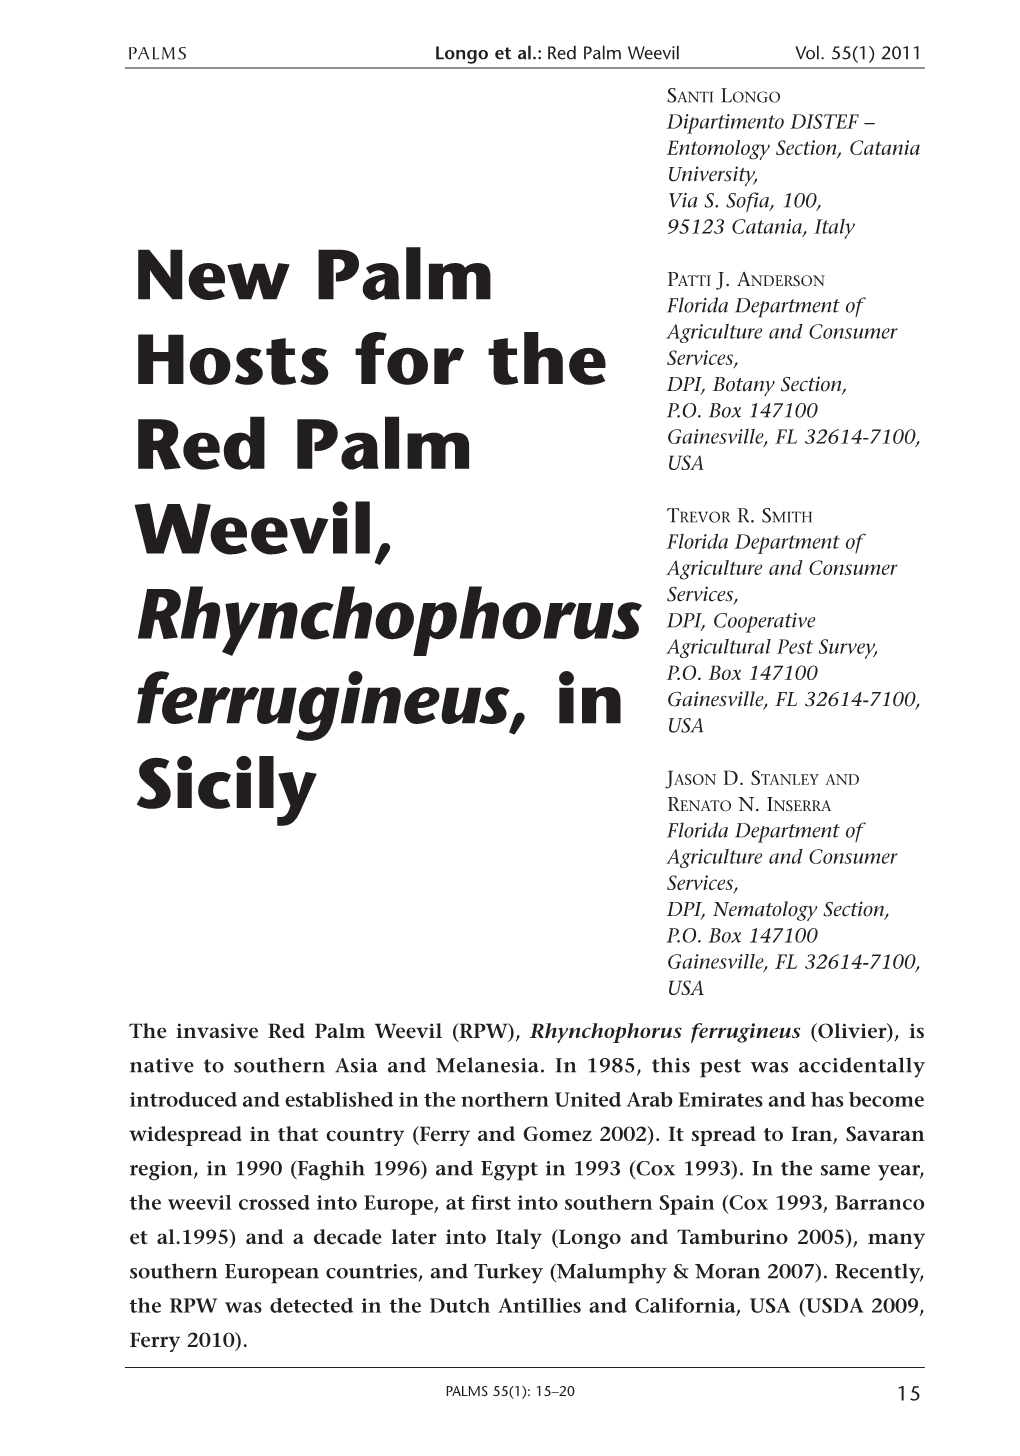 New Palm Hosts for the Red Palm Weevil, Rhynchophorus Ferrugineus, in Sicily